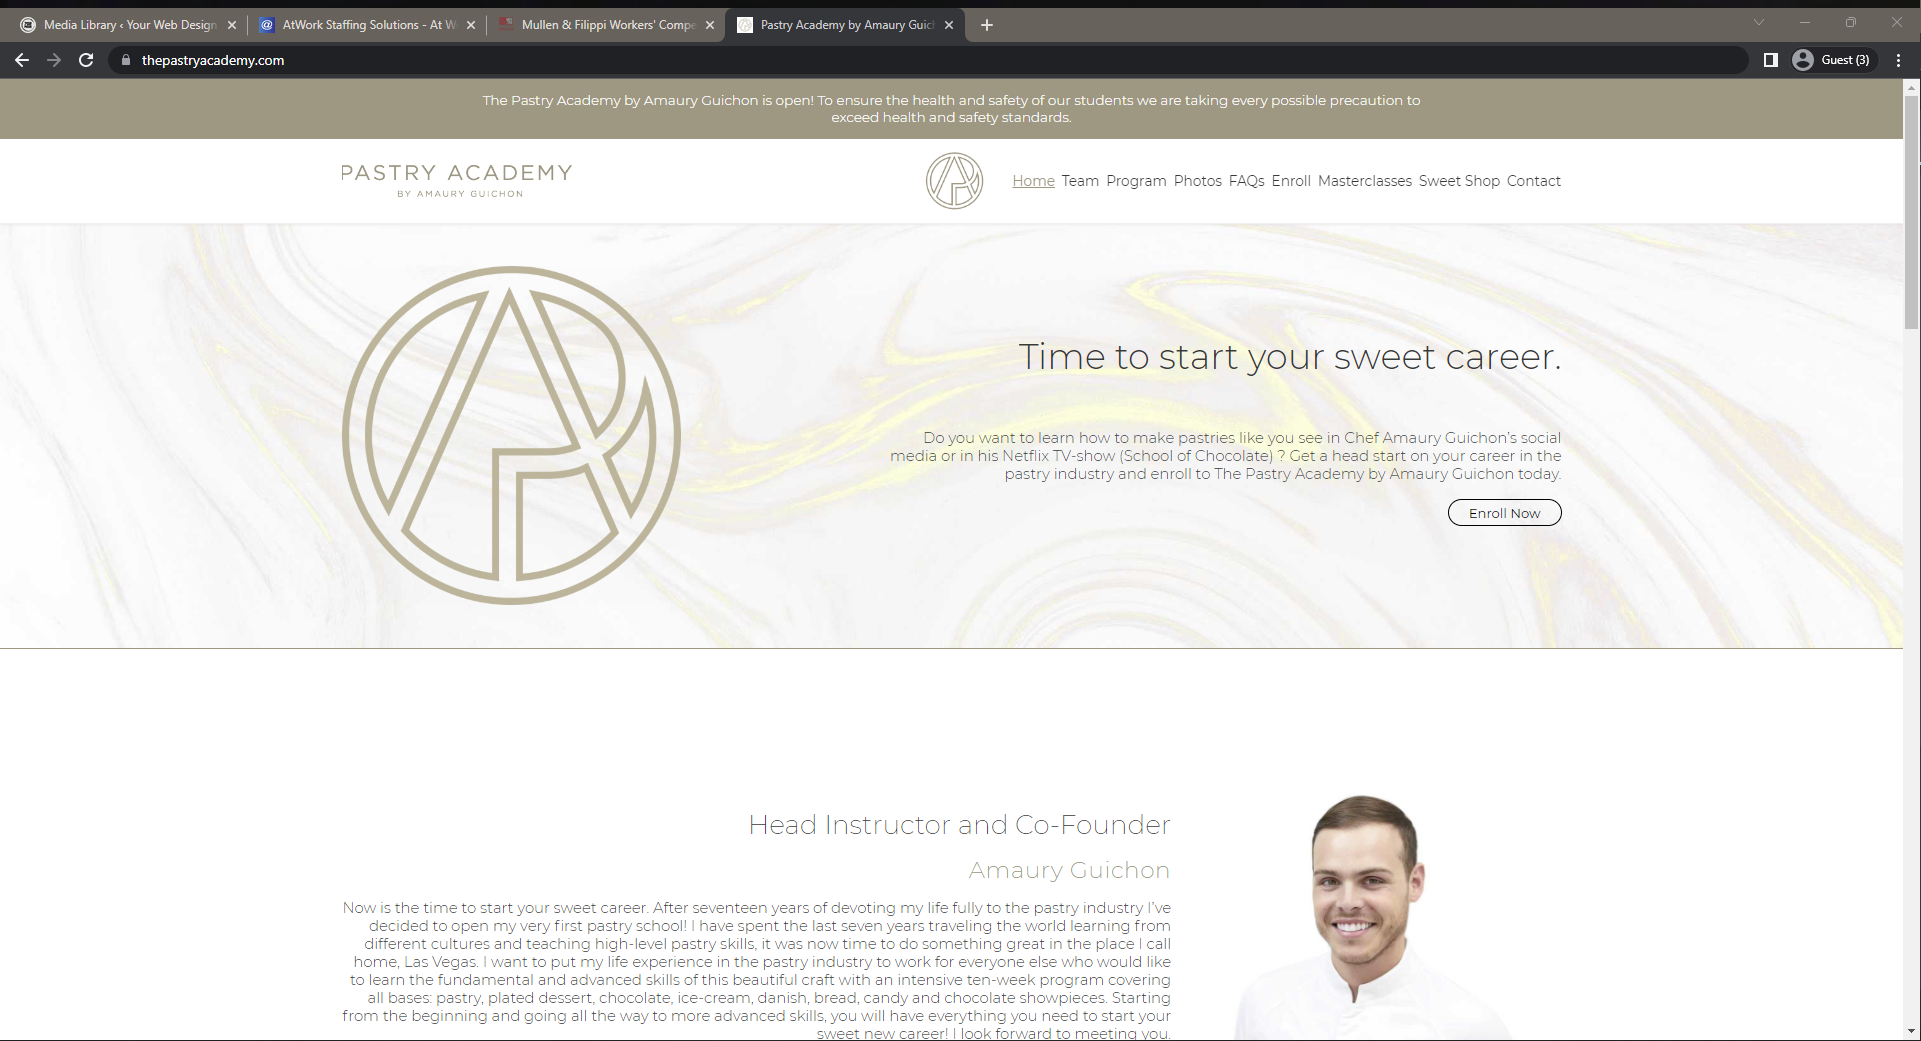 The Pastry Academy Website Design by 702 Pros - Marketing Roswell, GA